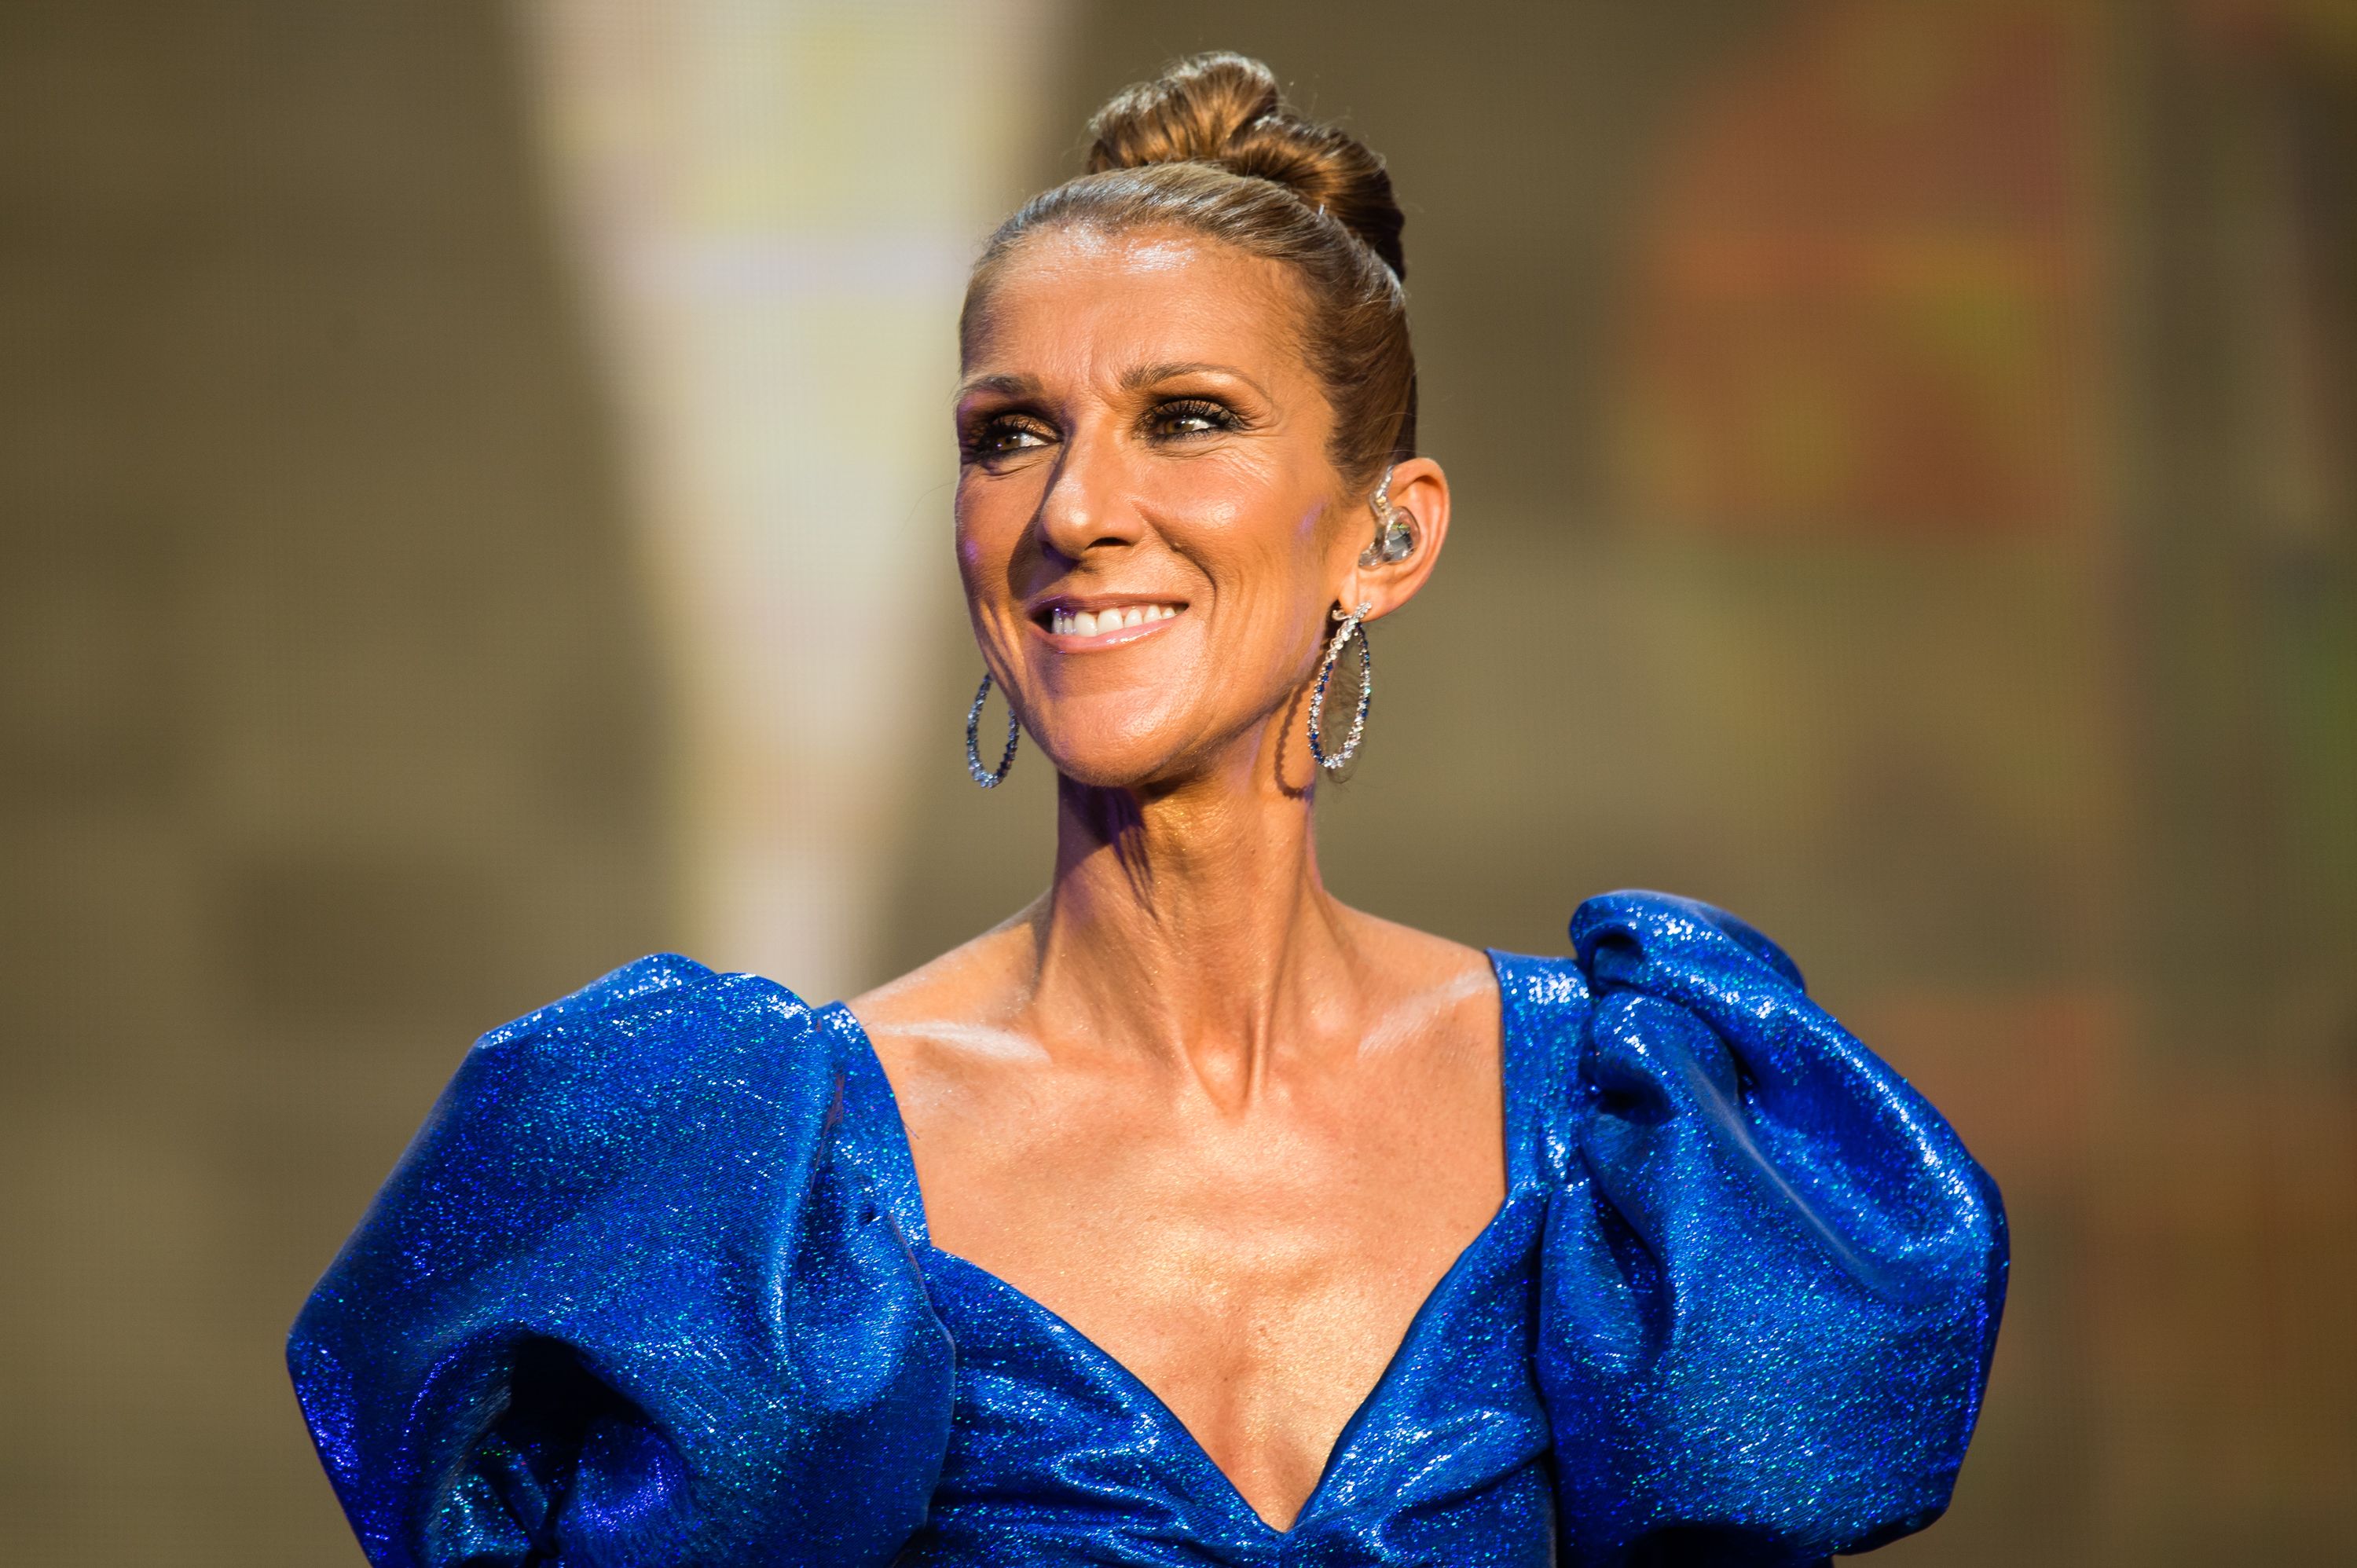 Celebrities and Fans Show Up for Céline Dion After She Posted a Heartbreaking Instagram